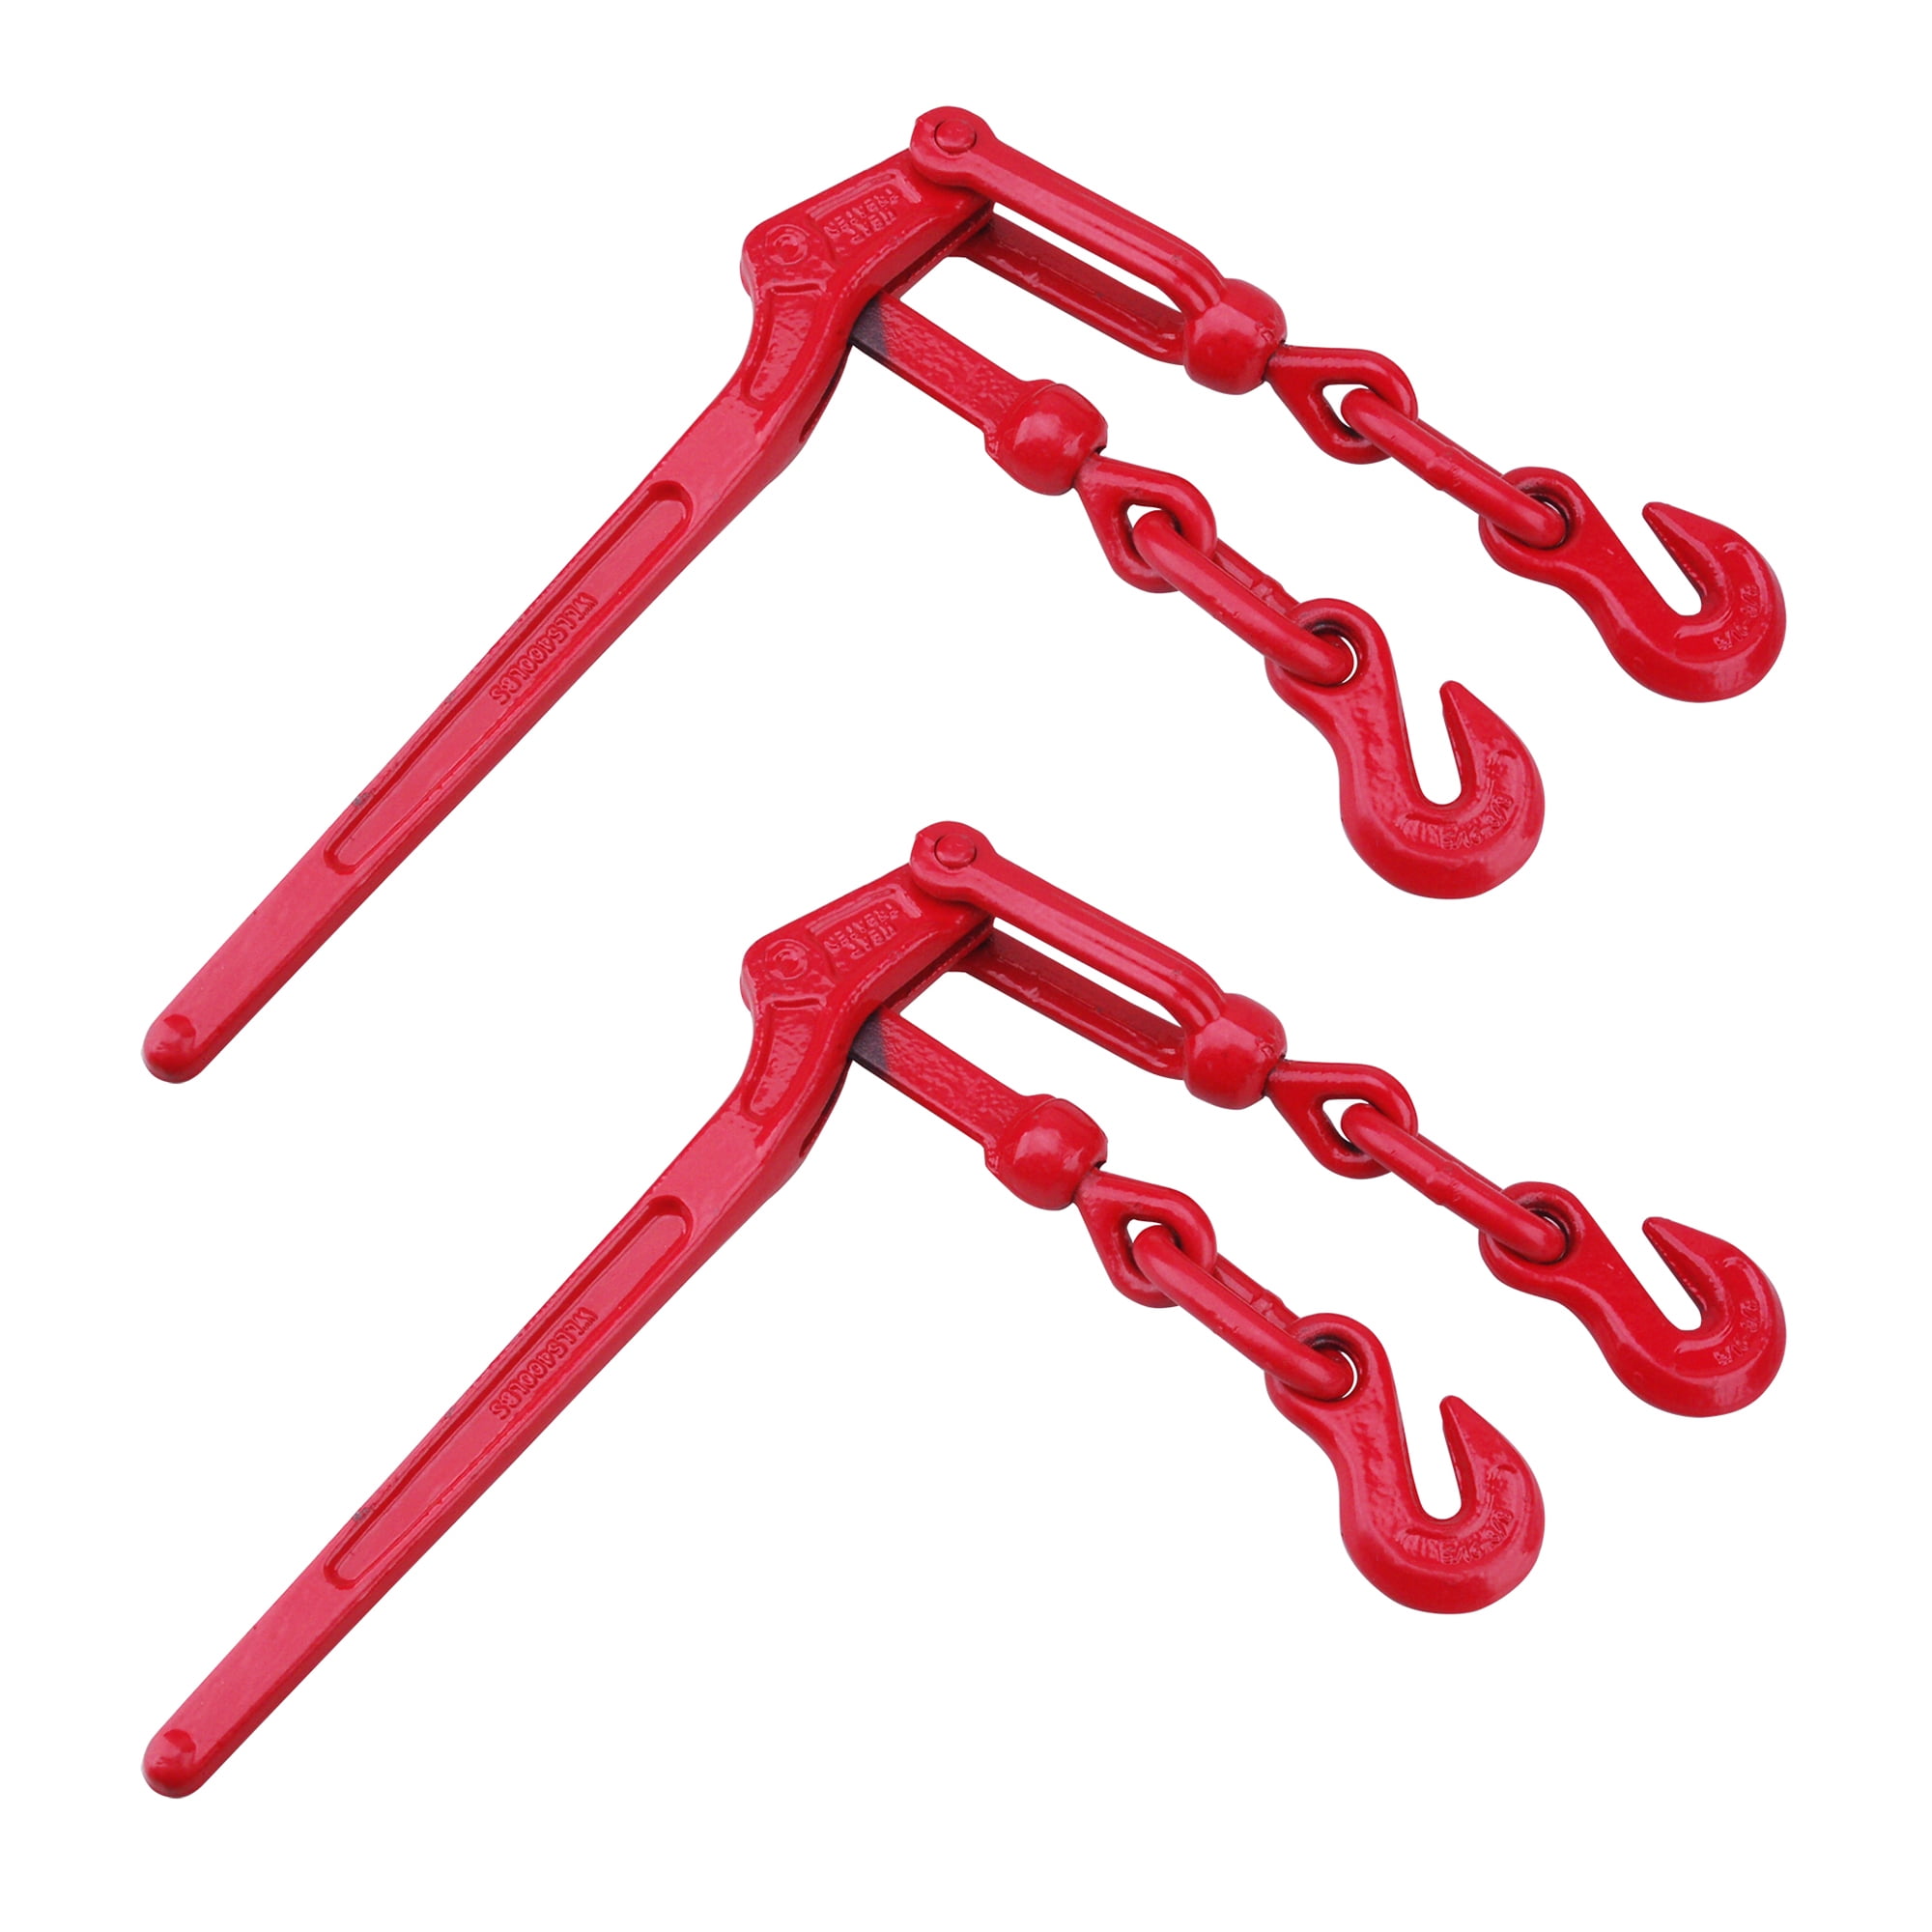 3/8" Chain Hook Tie Down Load Binders Ratcheting Levers 5/16" 2 Pack 5,400Lb 